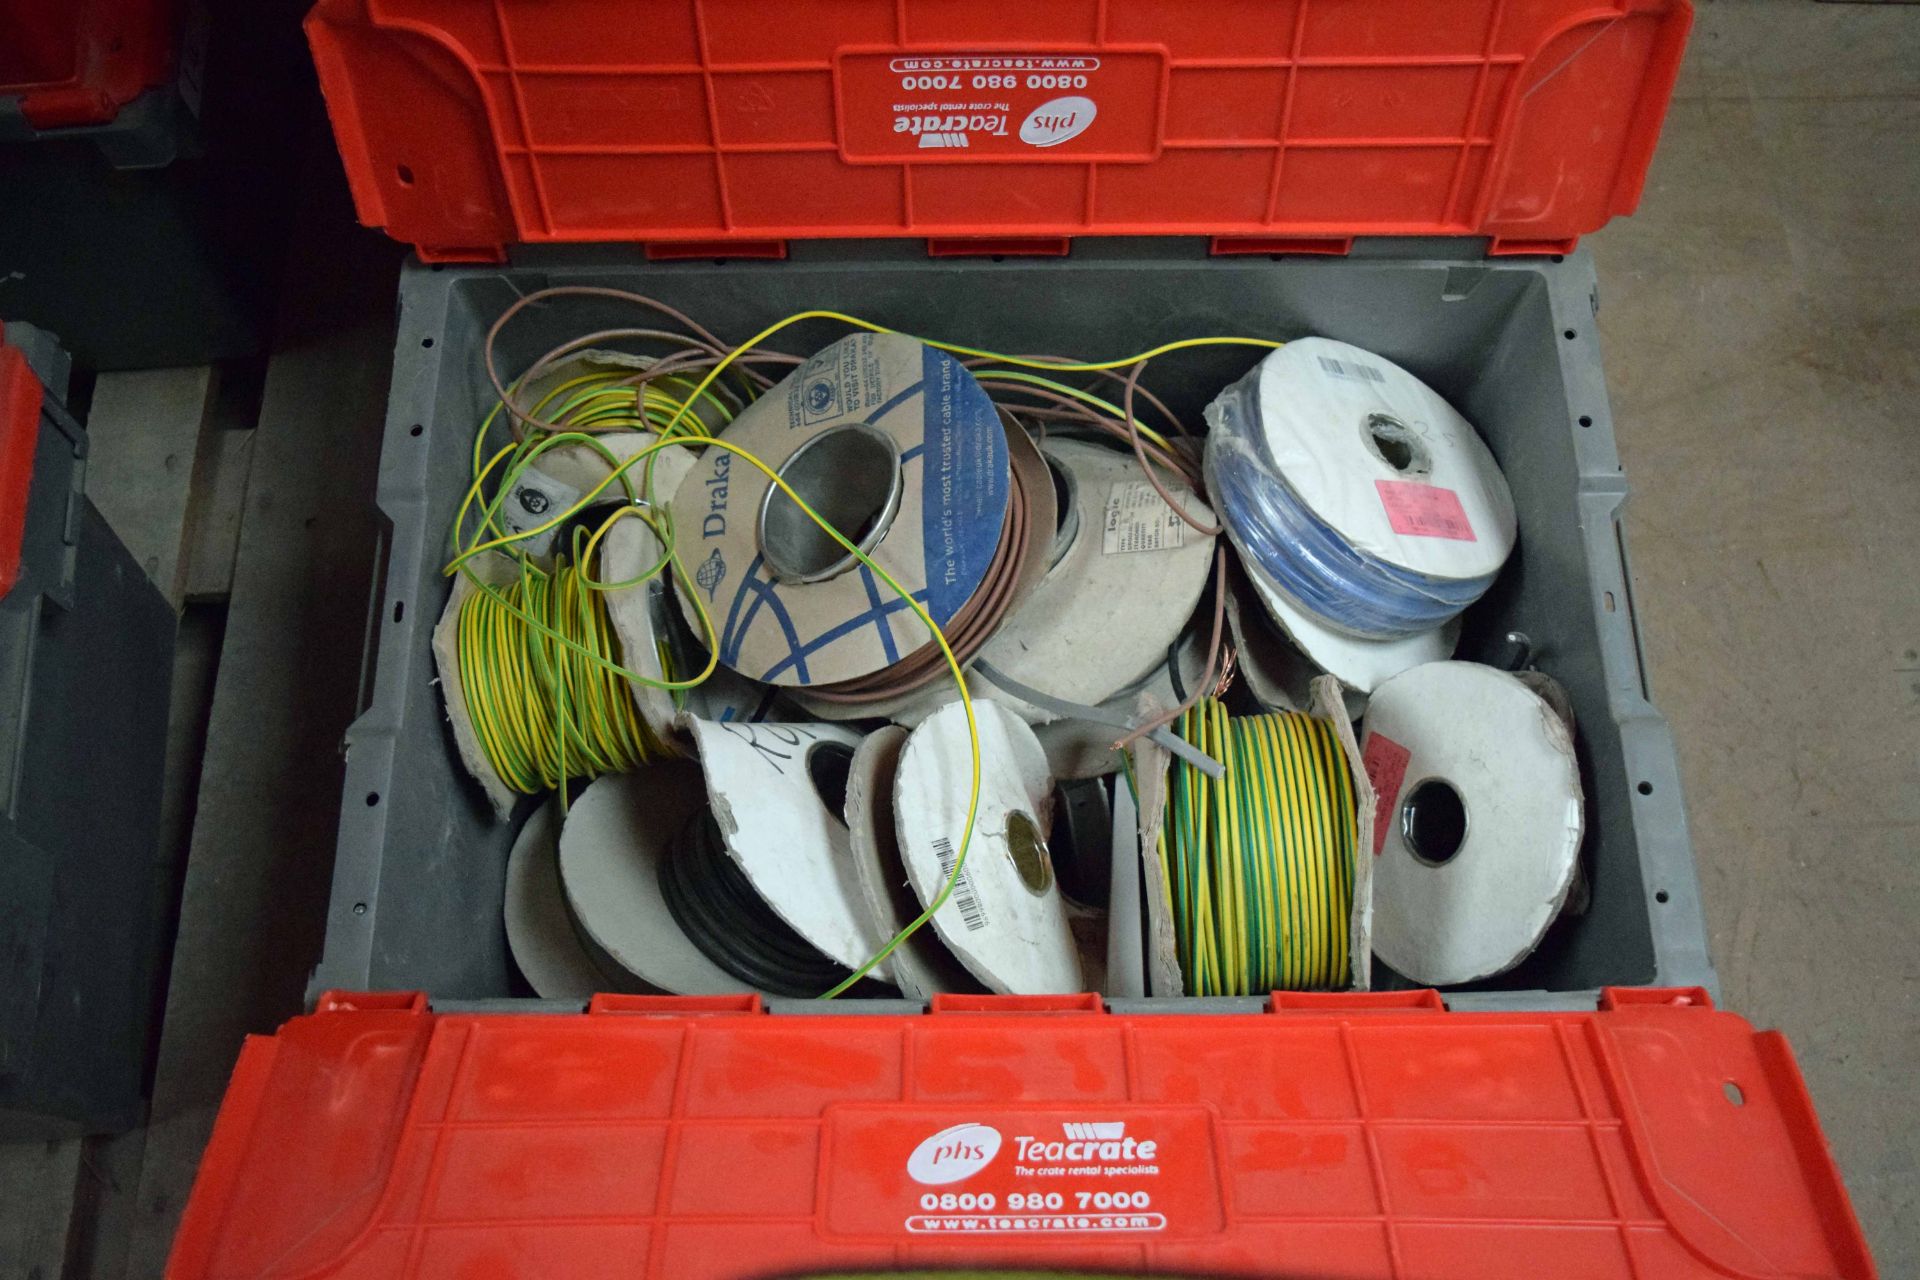 Three Tea Crates containing Assorted Reels of Electric Cables (As Photographed) - Image 4 of 4